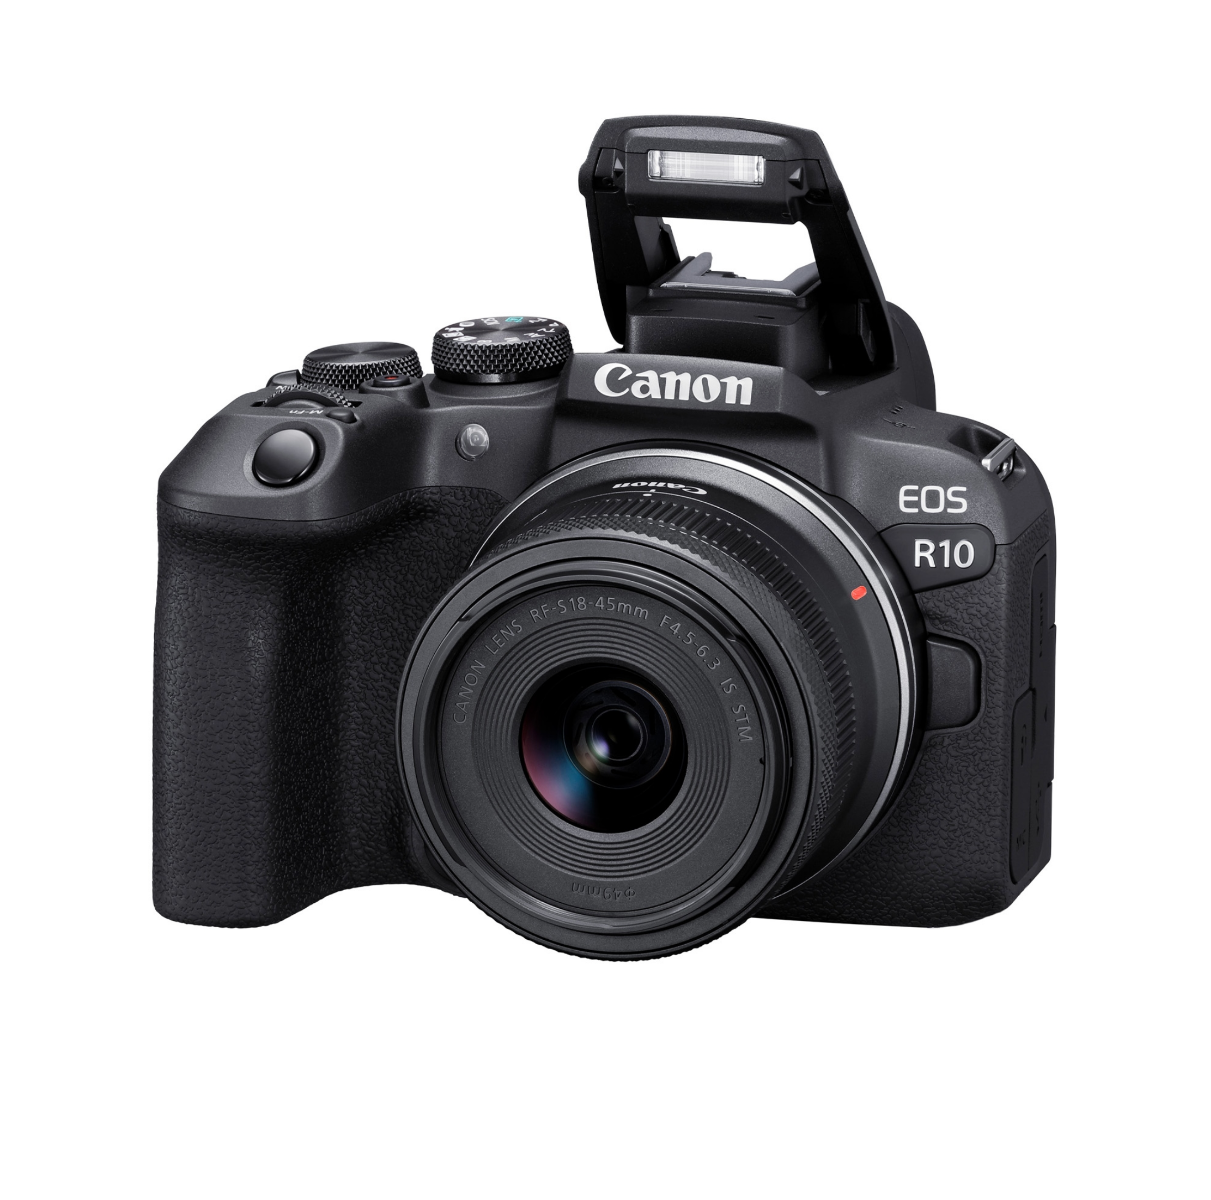 Canon EOS R10 Mirrorless Camera + RF-S 18-45mm lens Kit - Product photo 4 - Front side view of the camera with the inbuilt flash extended